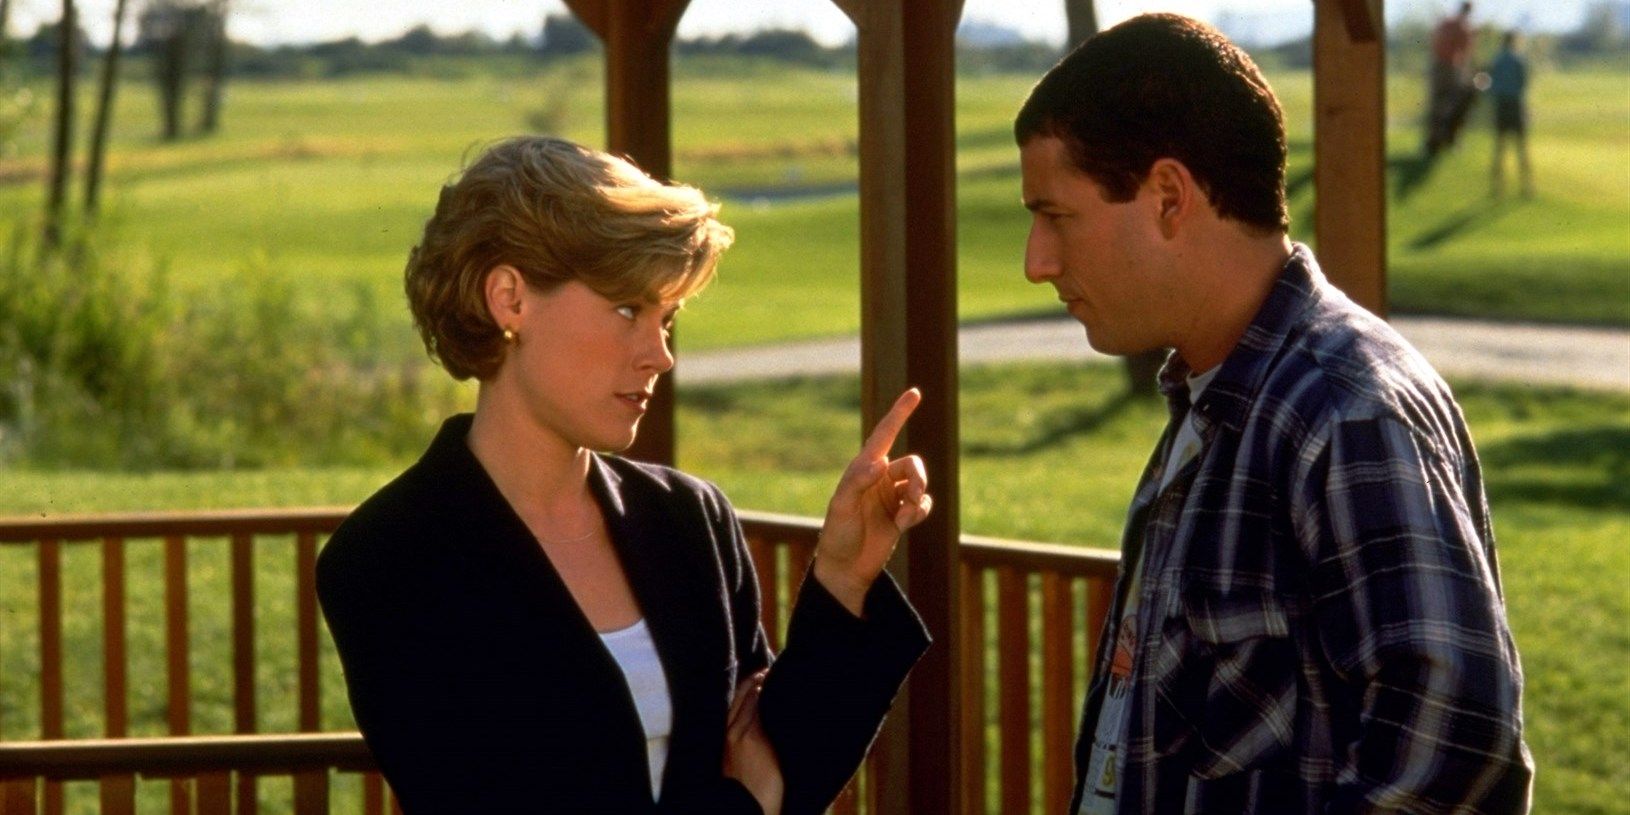 Julie Bowen as Virginia Venit pointing at Happy by a gazebo on the golf course in Happy Gilmore